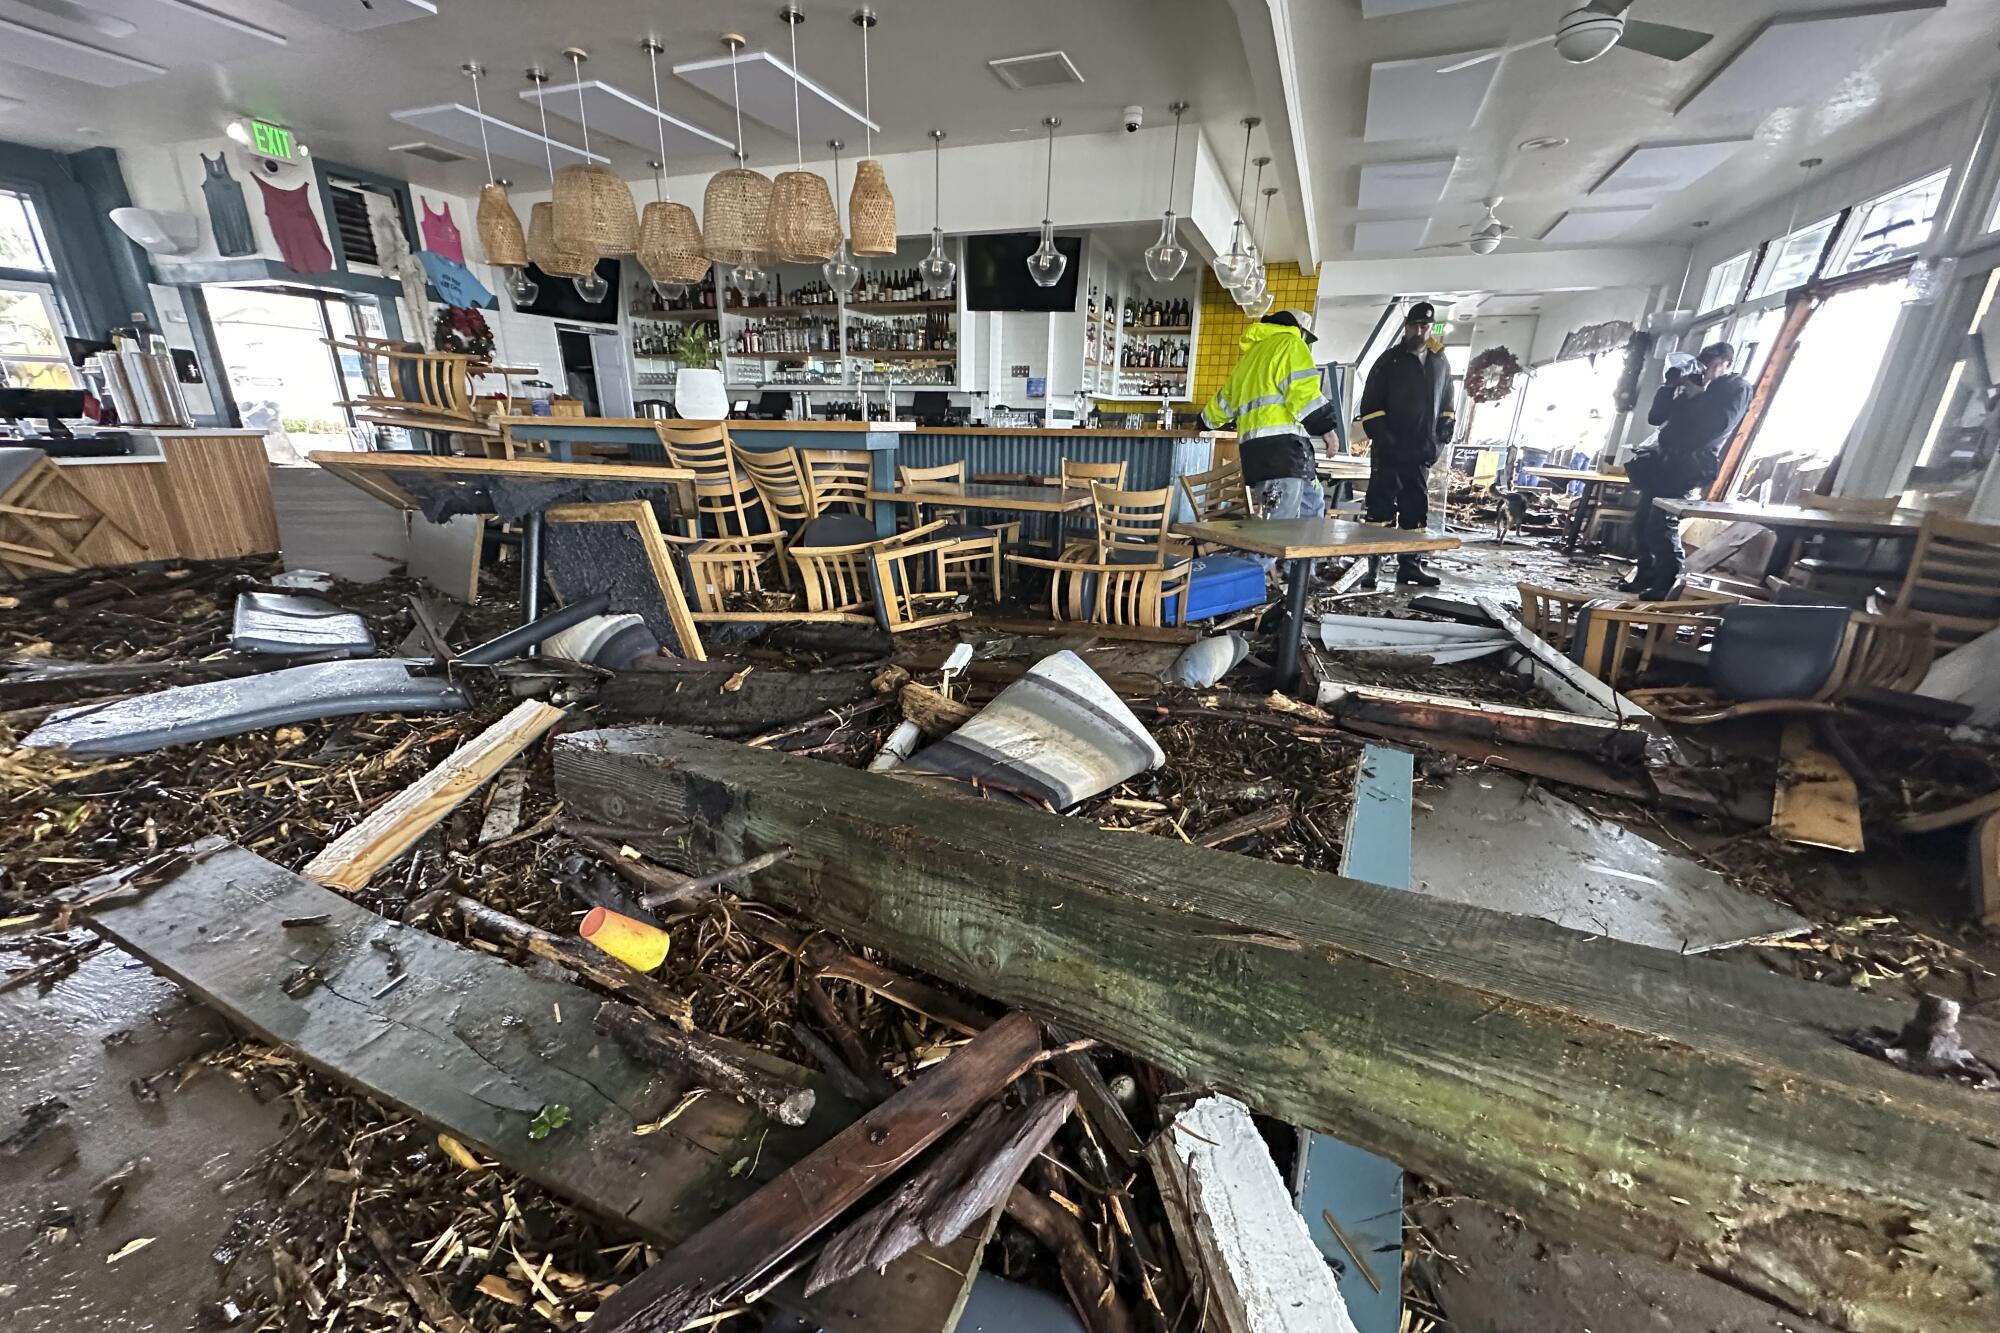 Inside of a restaurant is totally wrecked from storm damage 